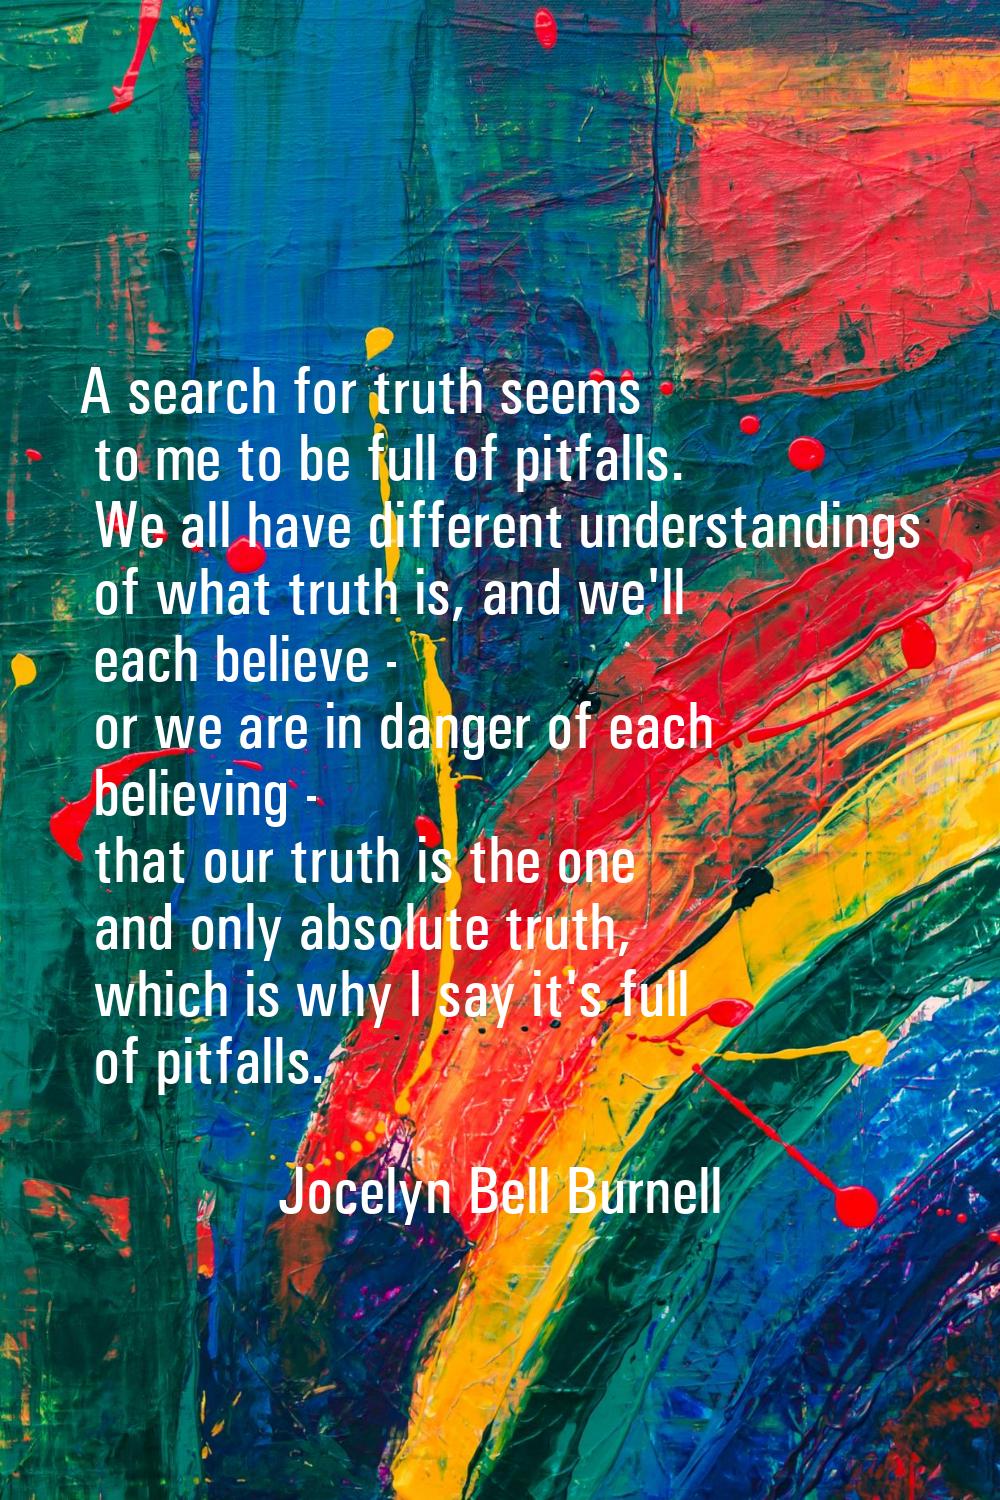 A search for truth seems to me to be full of pitfalls. We all have different understandings of what